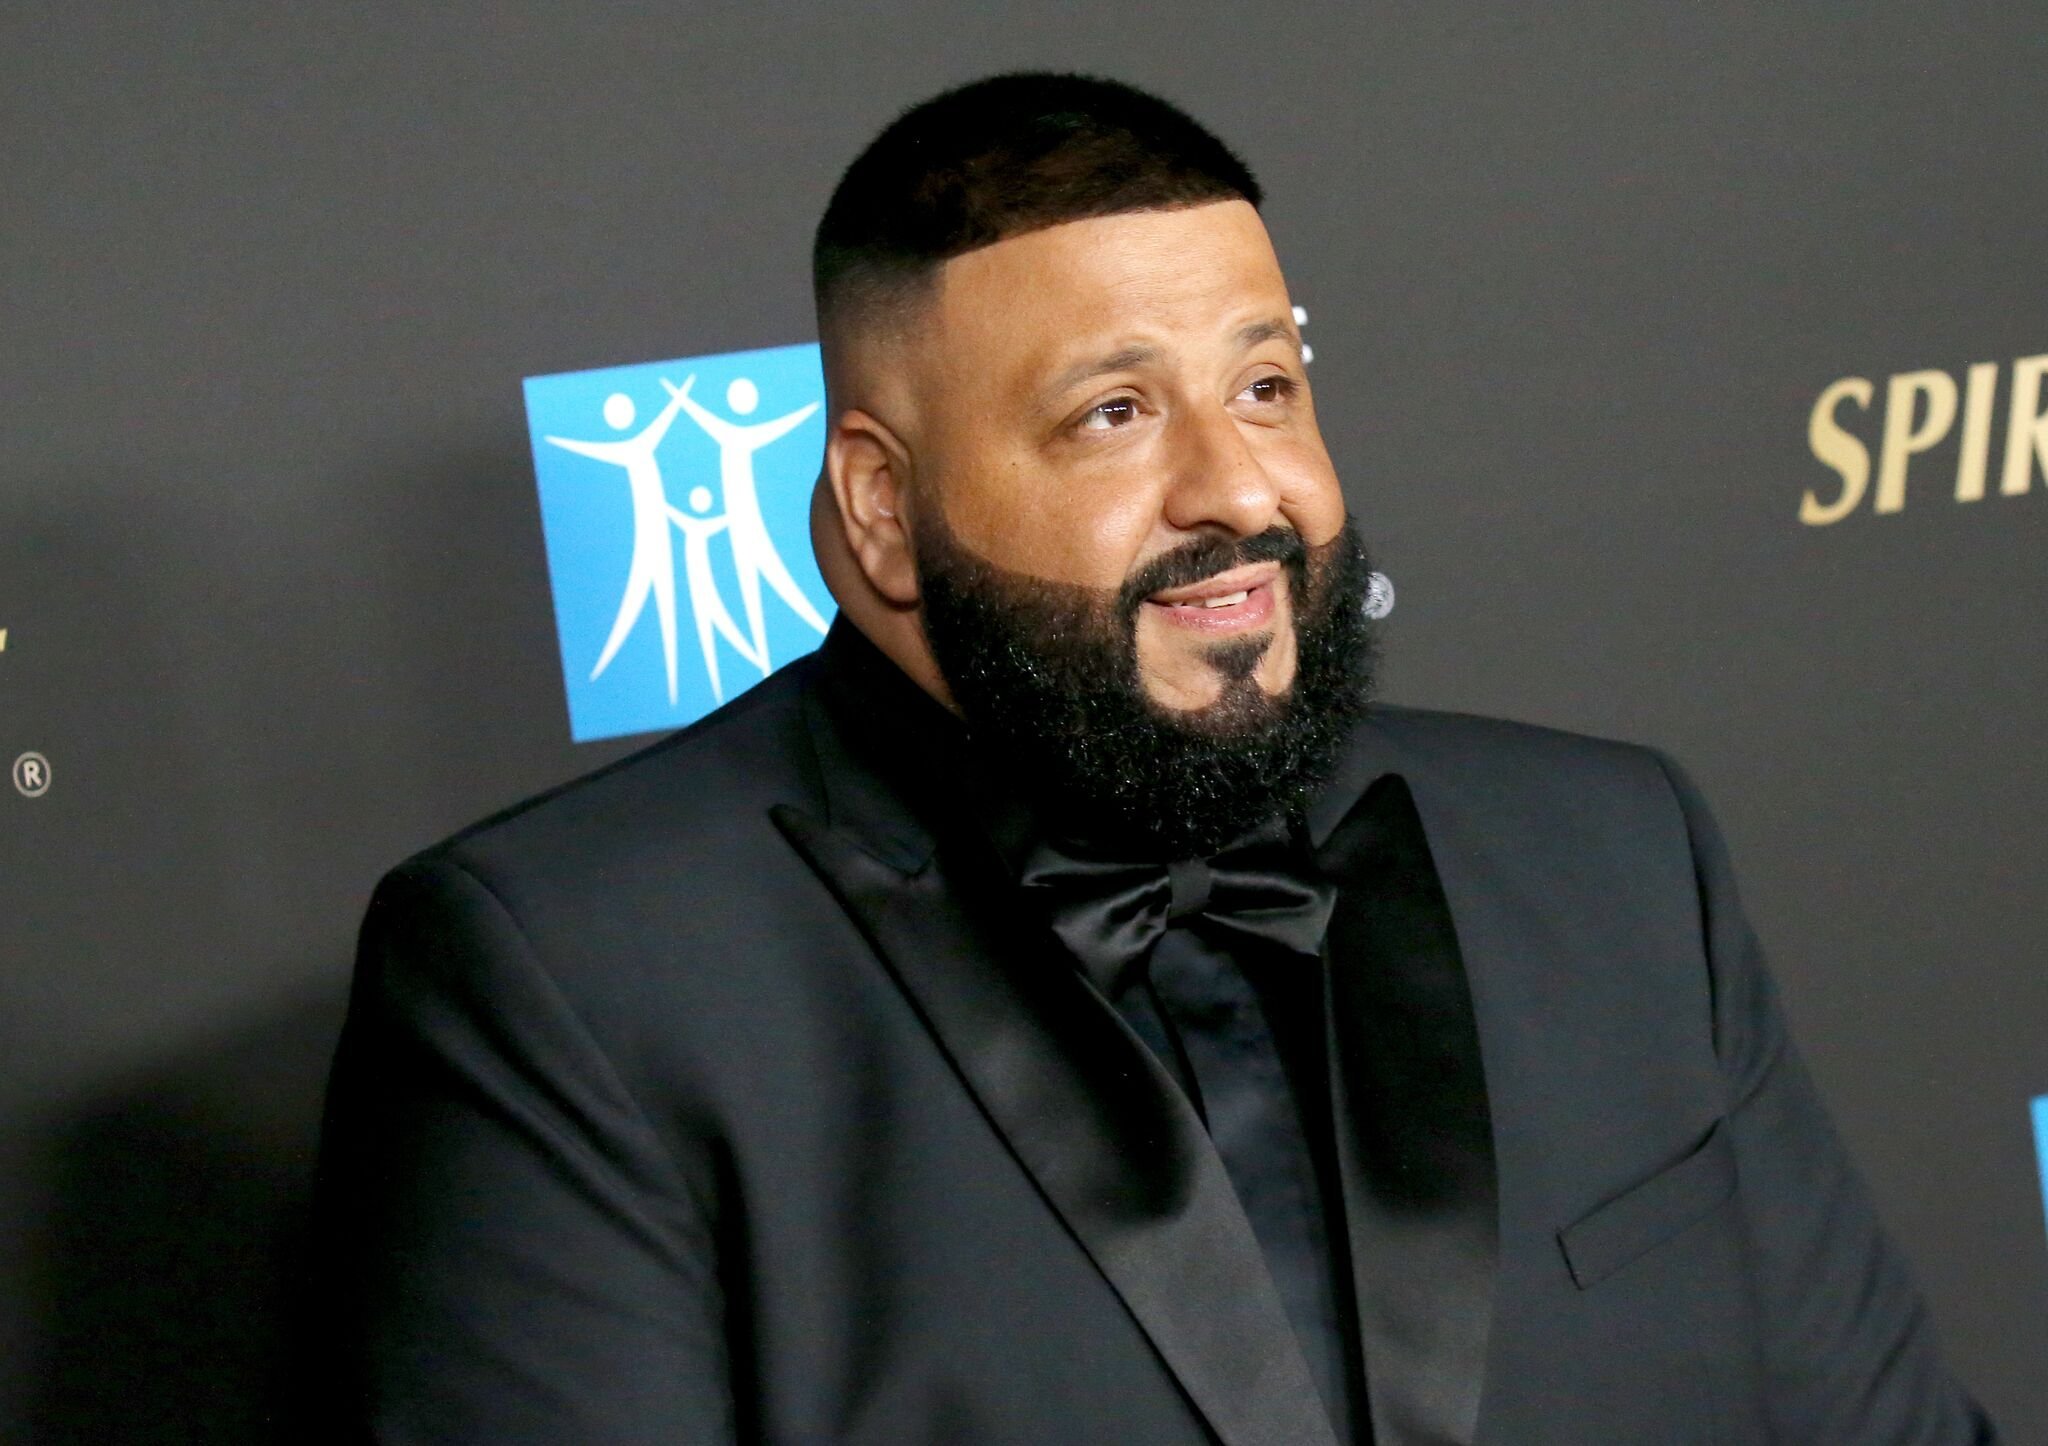 DJ Khaled attends the City Of Hope's Spirit of Life 2019 Gala held at The Barker Hanger on October 10, 2019 | Photo: Getty Images